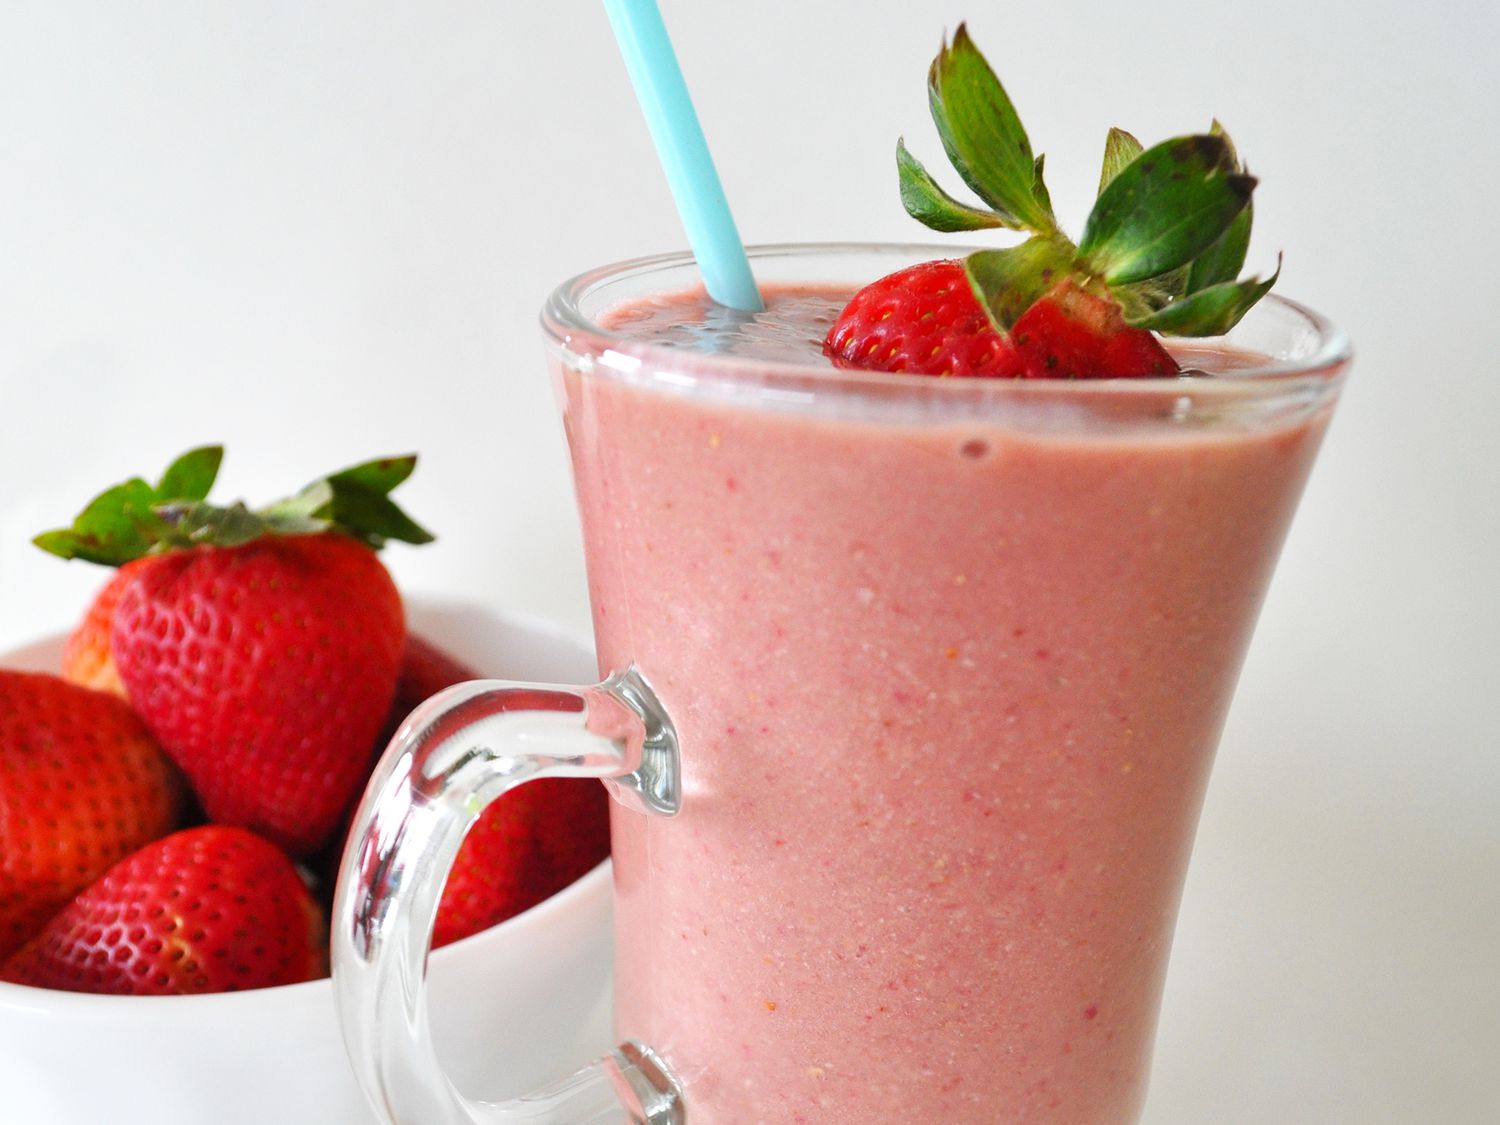 Close up view of a Strawberry Banana Protein Smoothie in a glass with a straw, garnished with a strawberry, and strawberries in a white bowl